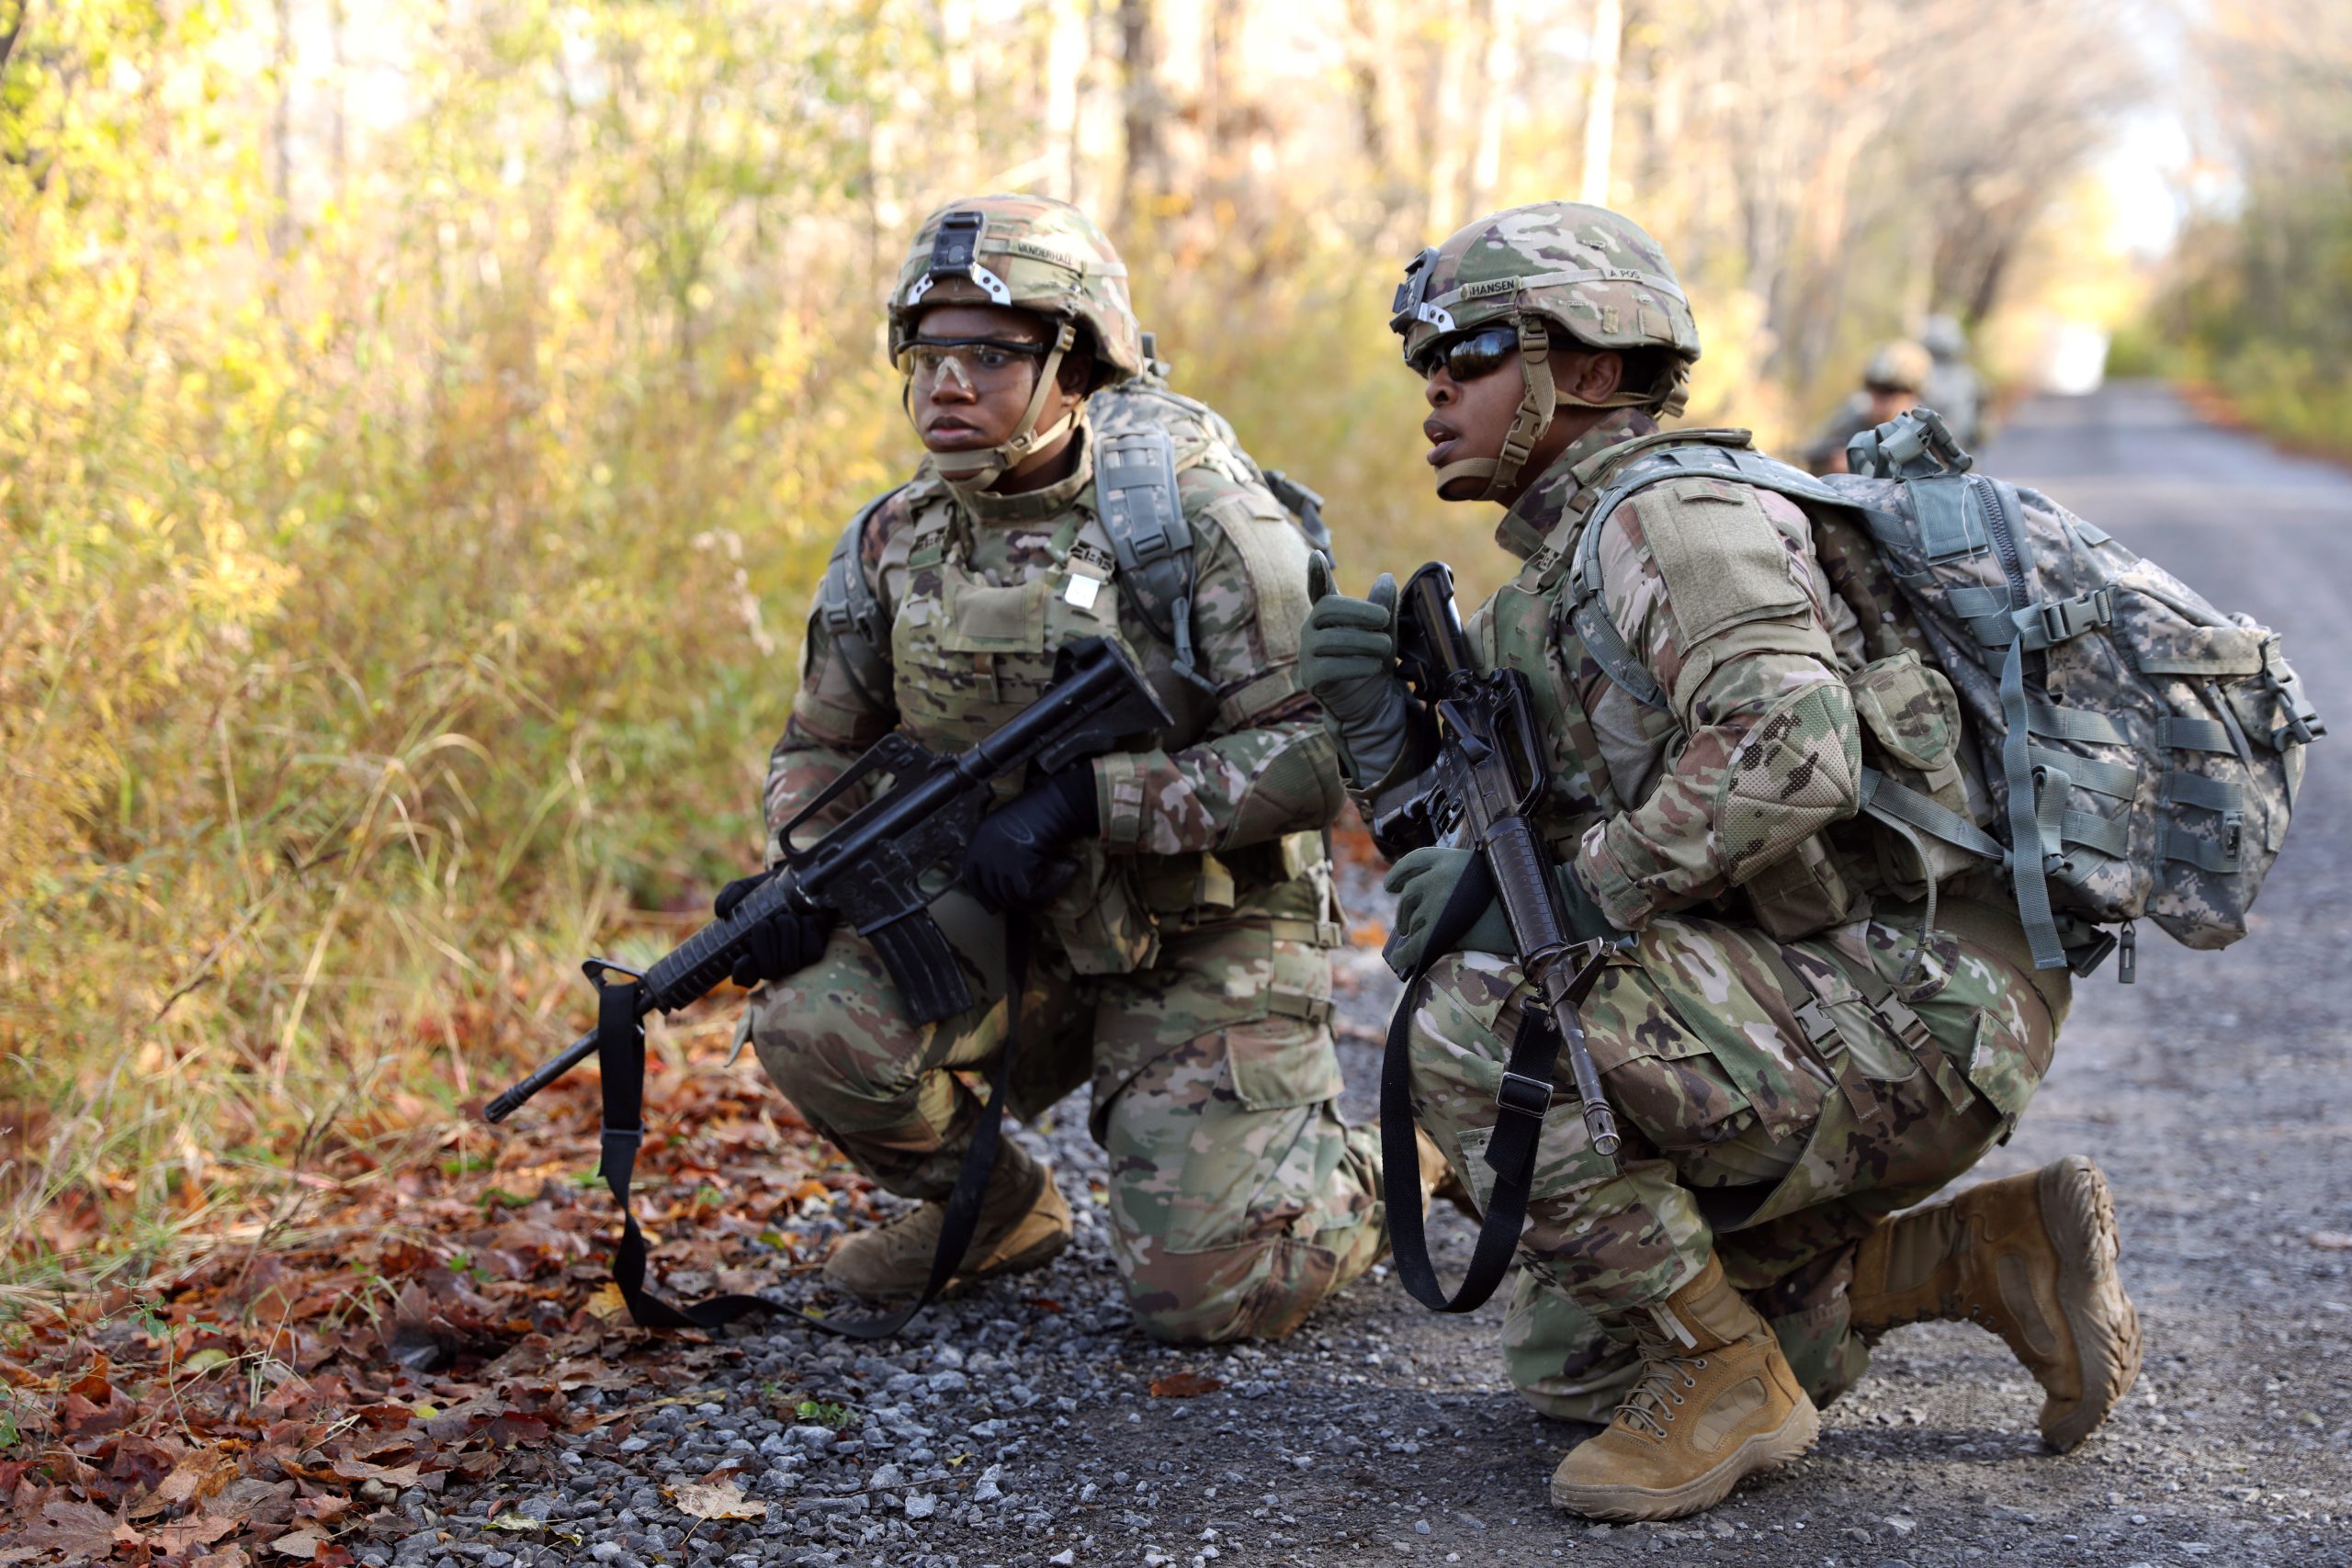 Soldiers with 10th Mountain Division at Ft. Drum surveys an obstacle during a human factor evaluation on the Modular Scalable Vest Gen II with PEO Soldier Oct. 29, 2019. (Photo Credit: U.S. Army photo by David Jordan)